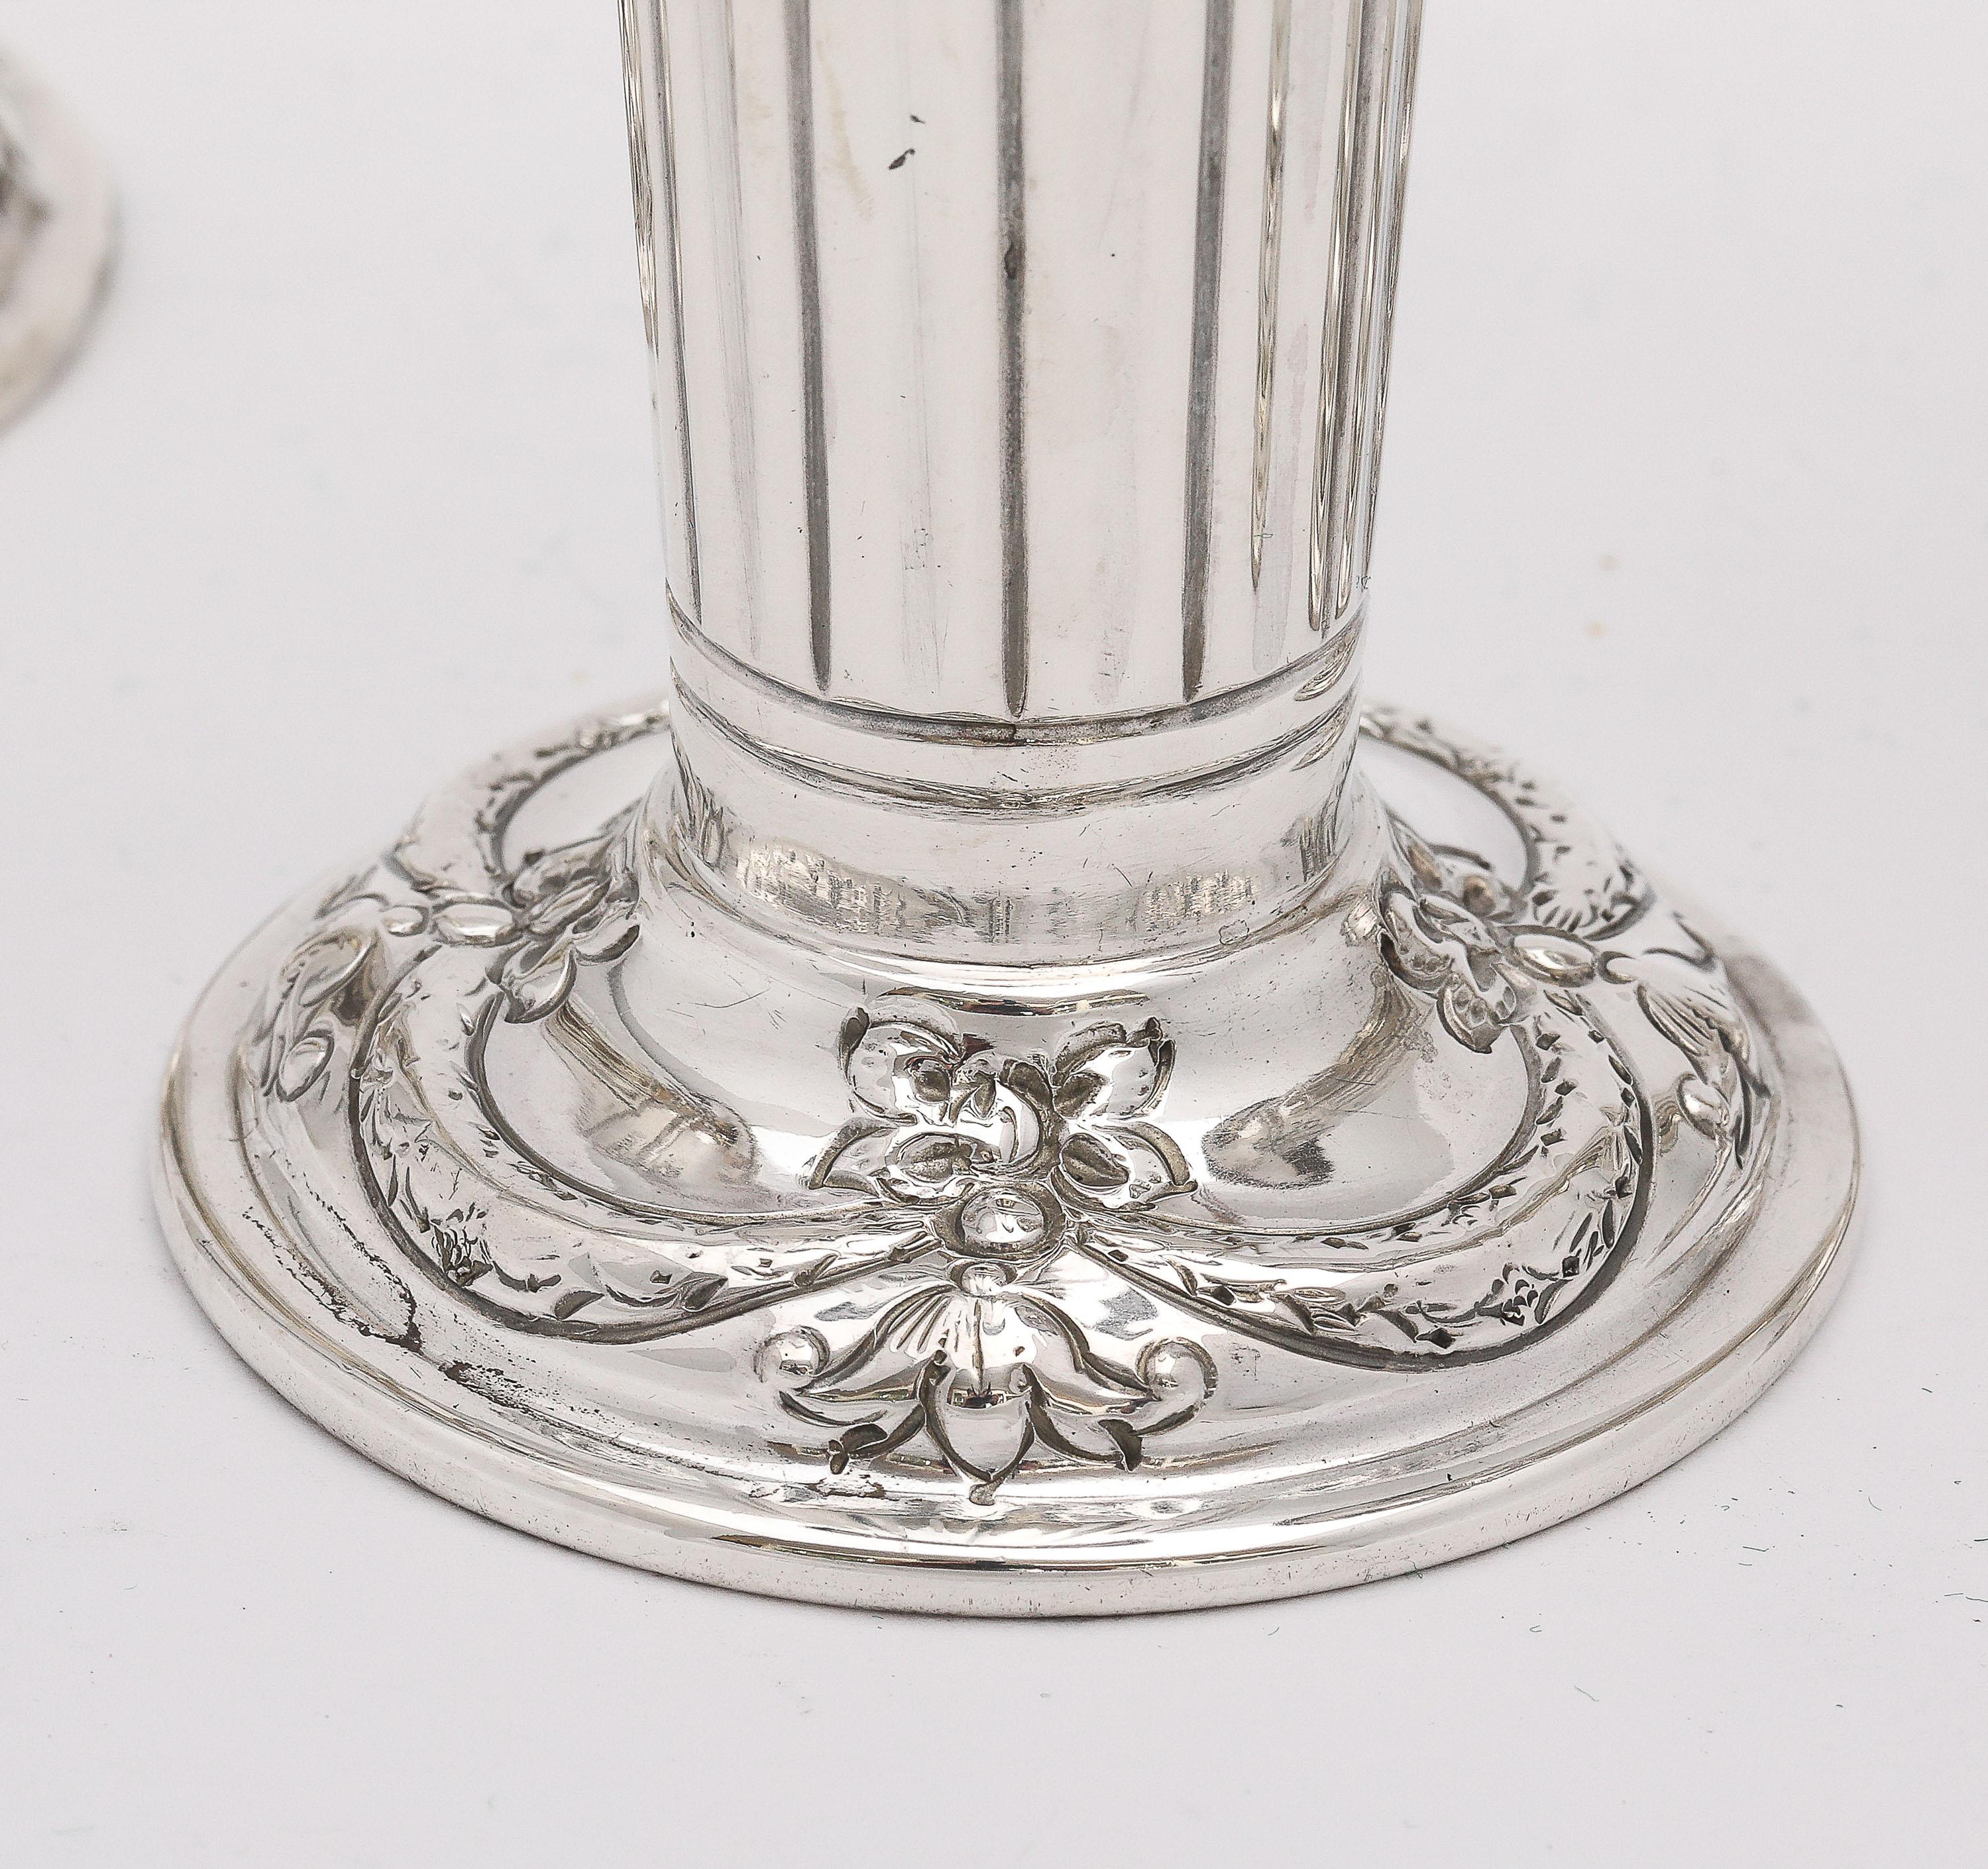 Rare Victorian Period Set of Four Matching Sterling Silver Bud Vases By Atkin For Sale 6